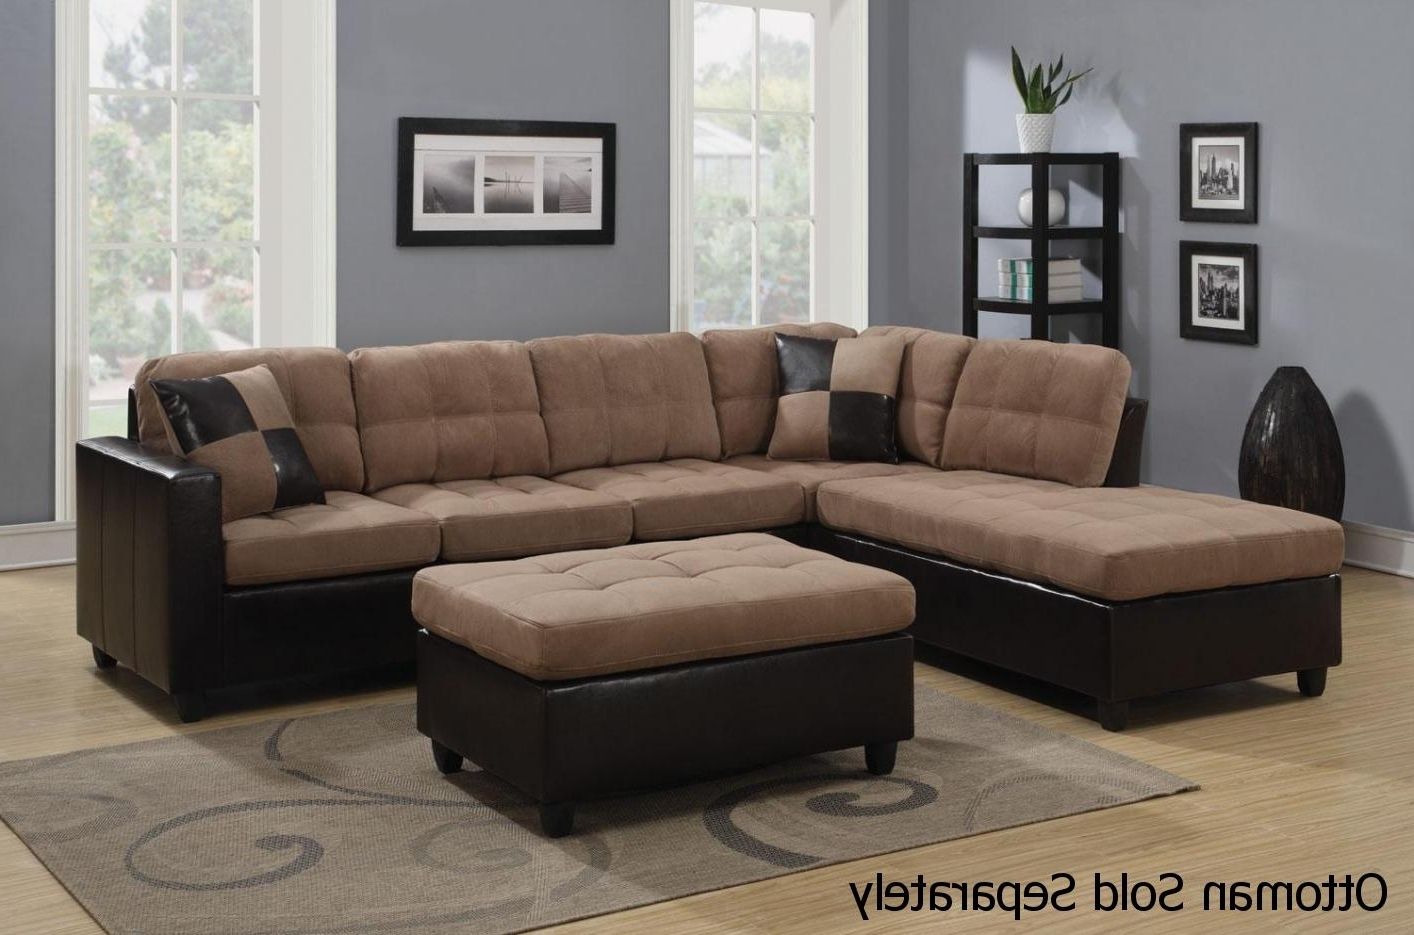 Beige Sectional Sofas Regarding Current Mallory Beige Leather Sectional Sofa – Steal A Sofa Furniture (View 1 of 15)